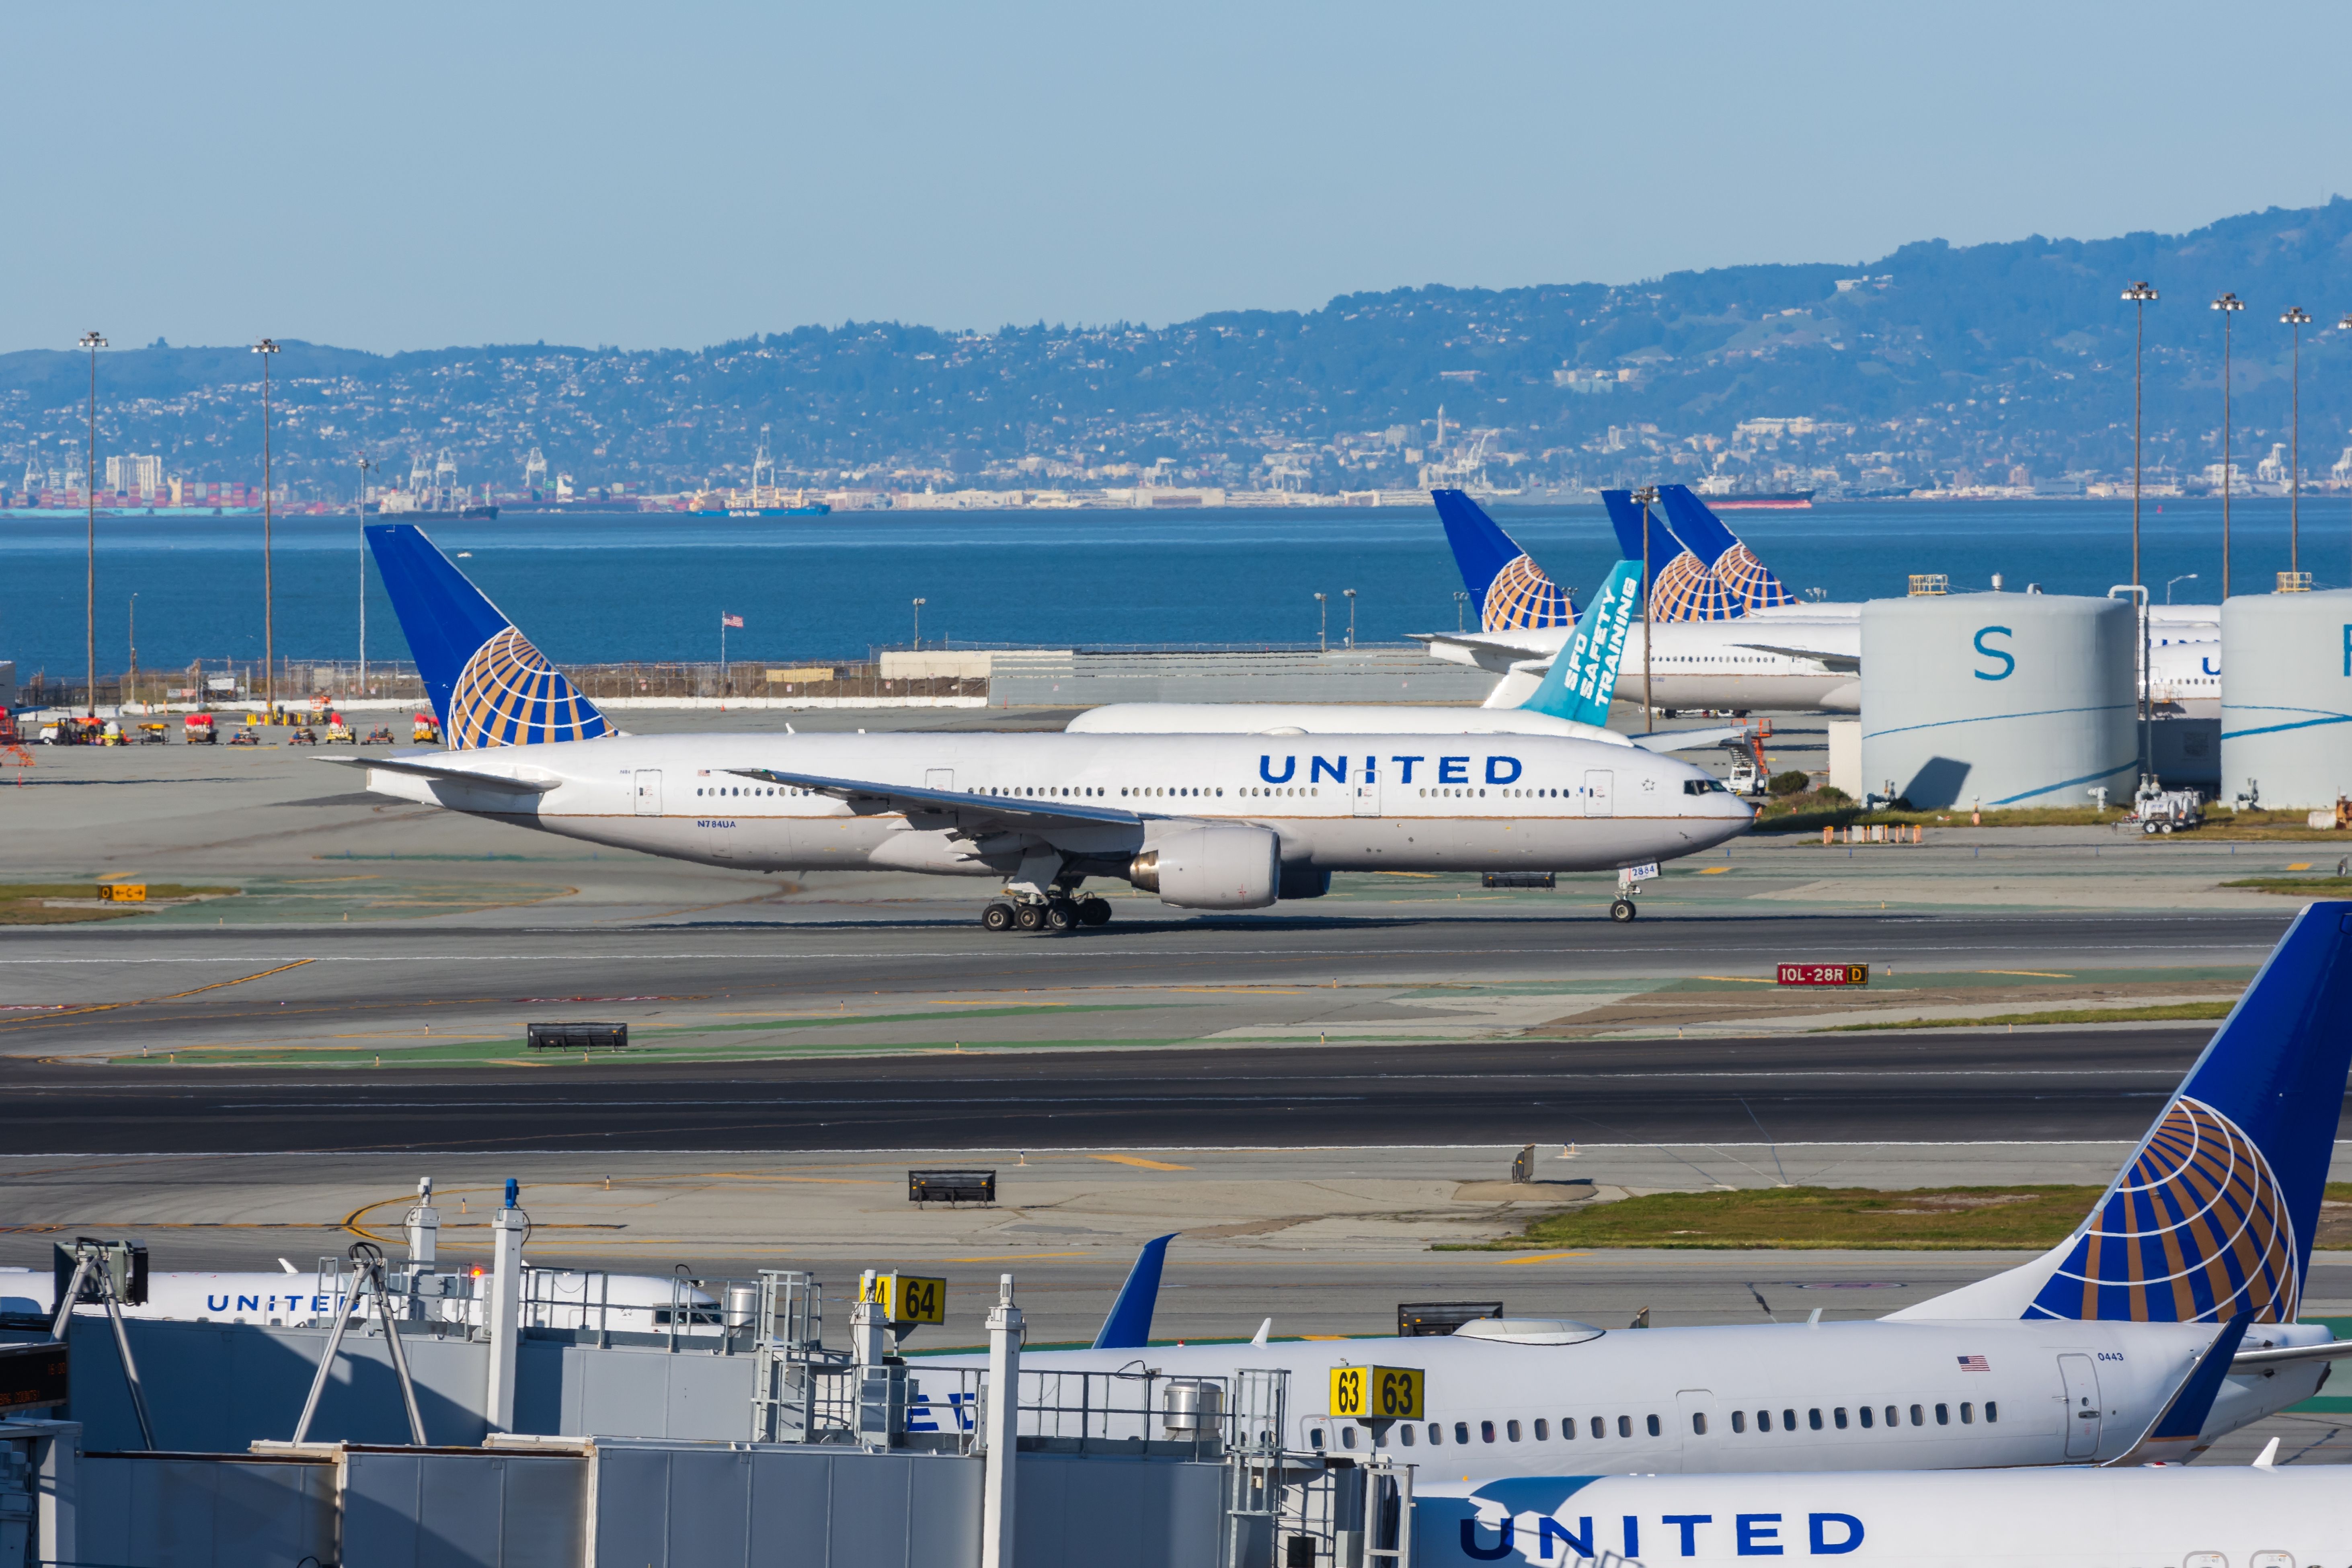 Multiple United Airlines aircraft on the apron in San Francisco.